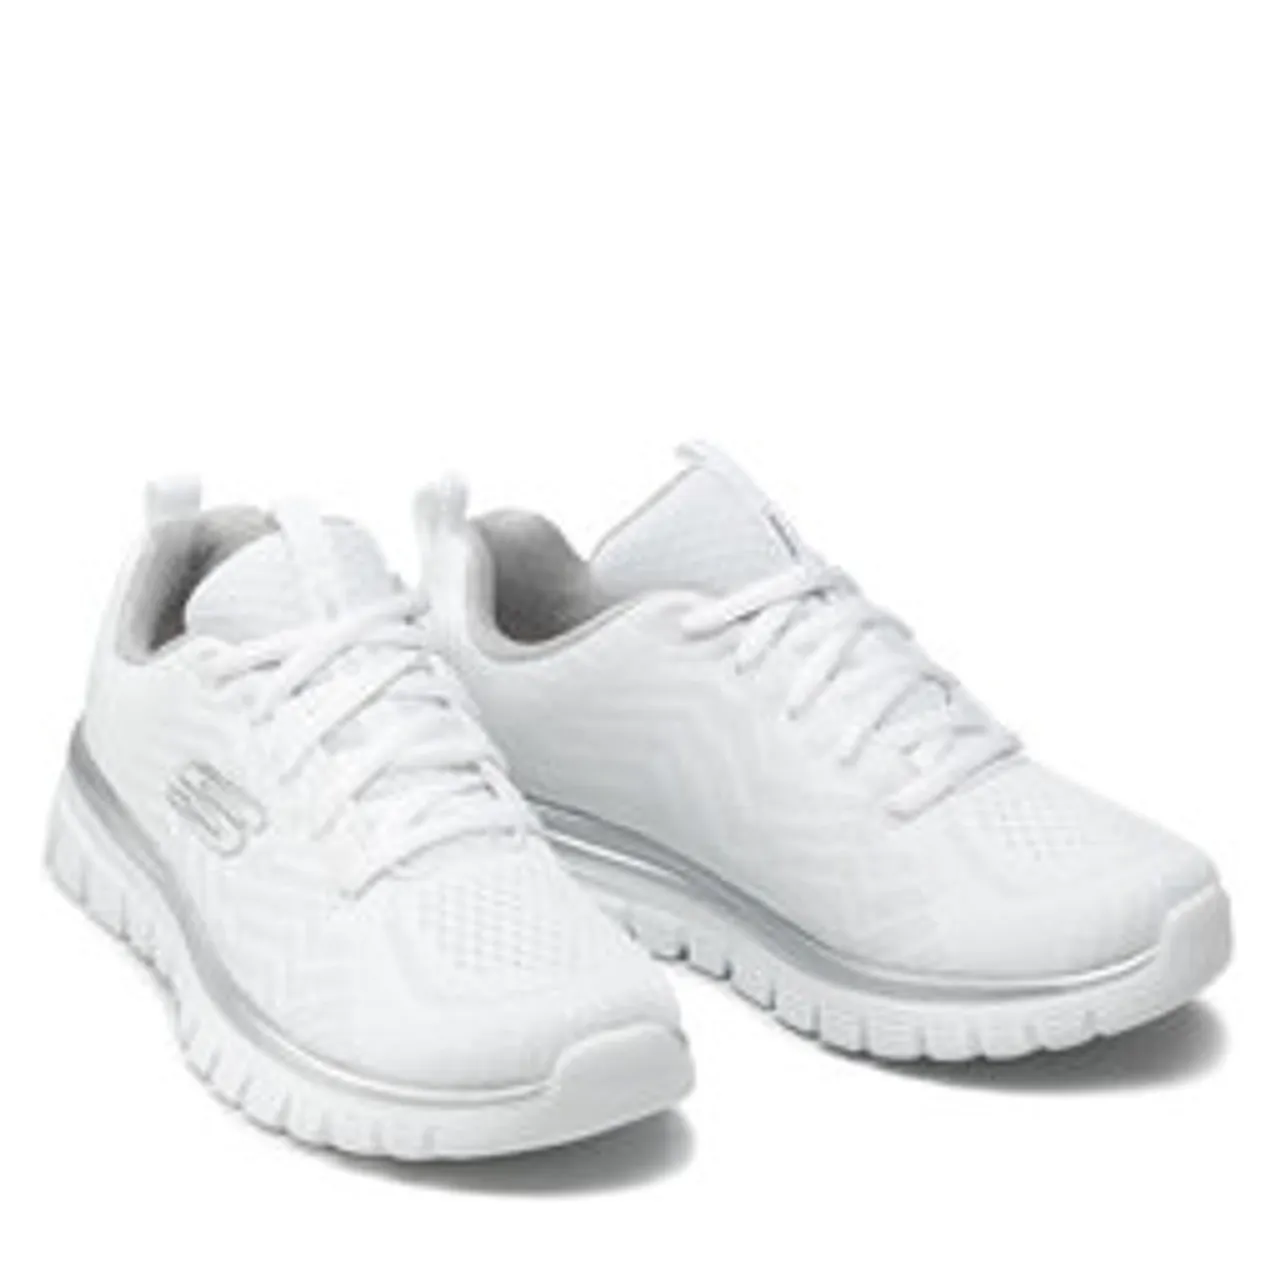 Schuhe Skechers Get Connected 12615/WSL White/Silver